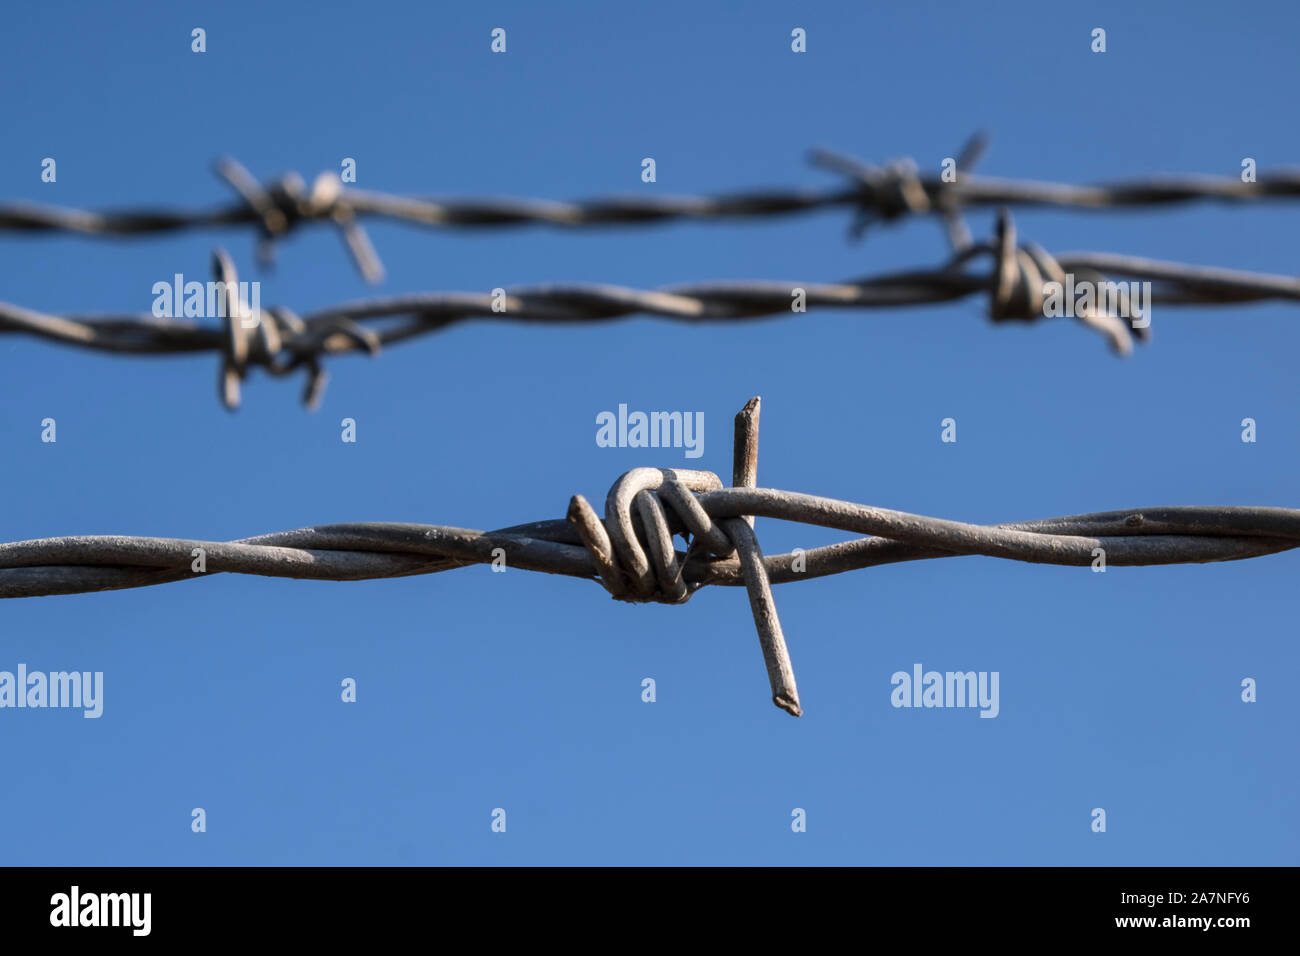 Barbed wire fence. Stock Photo